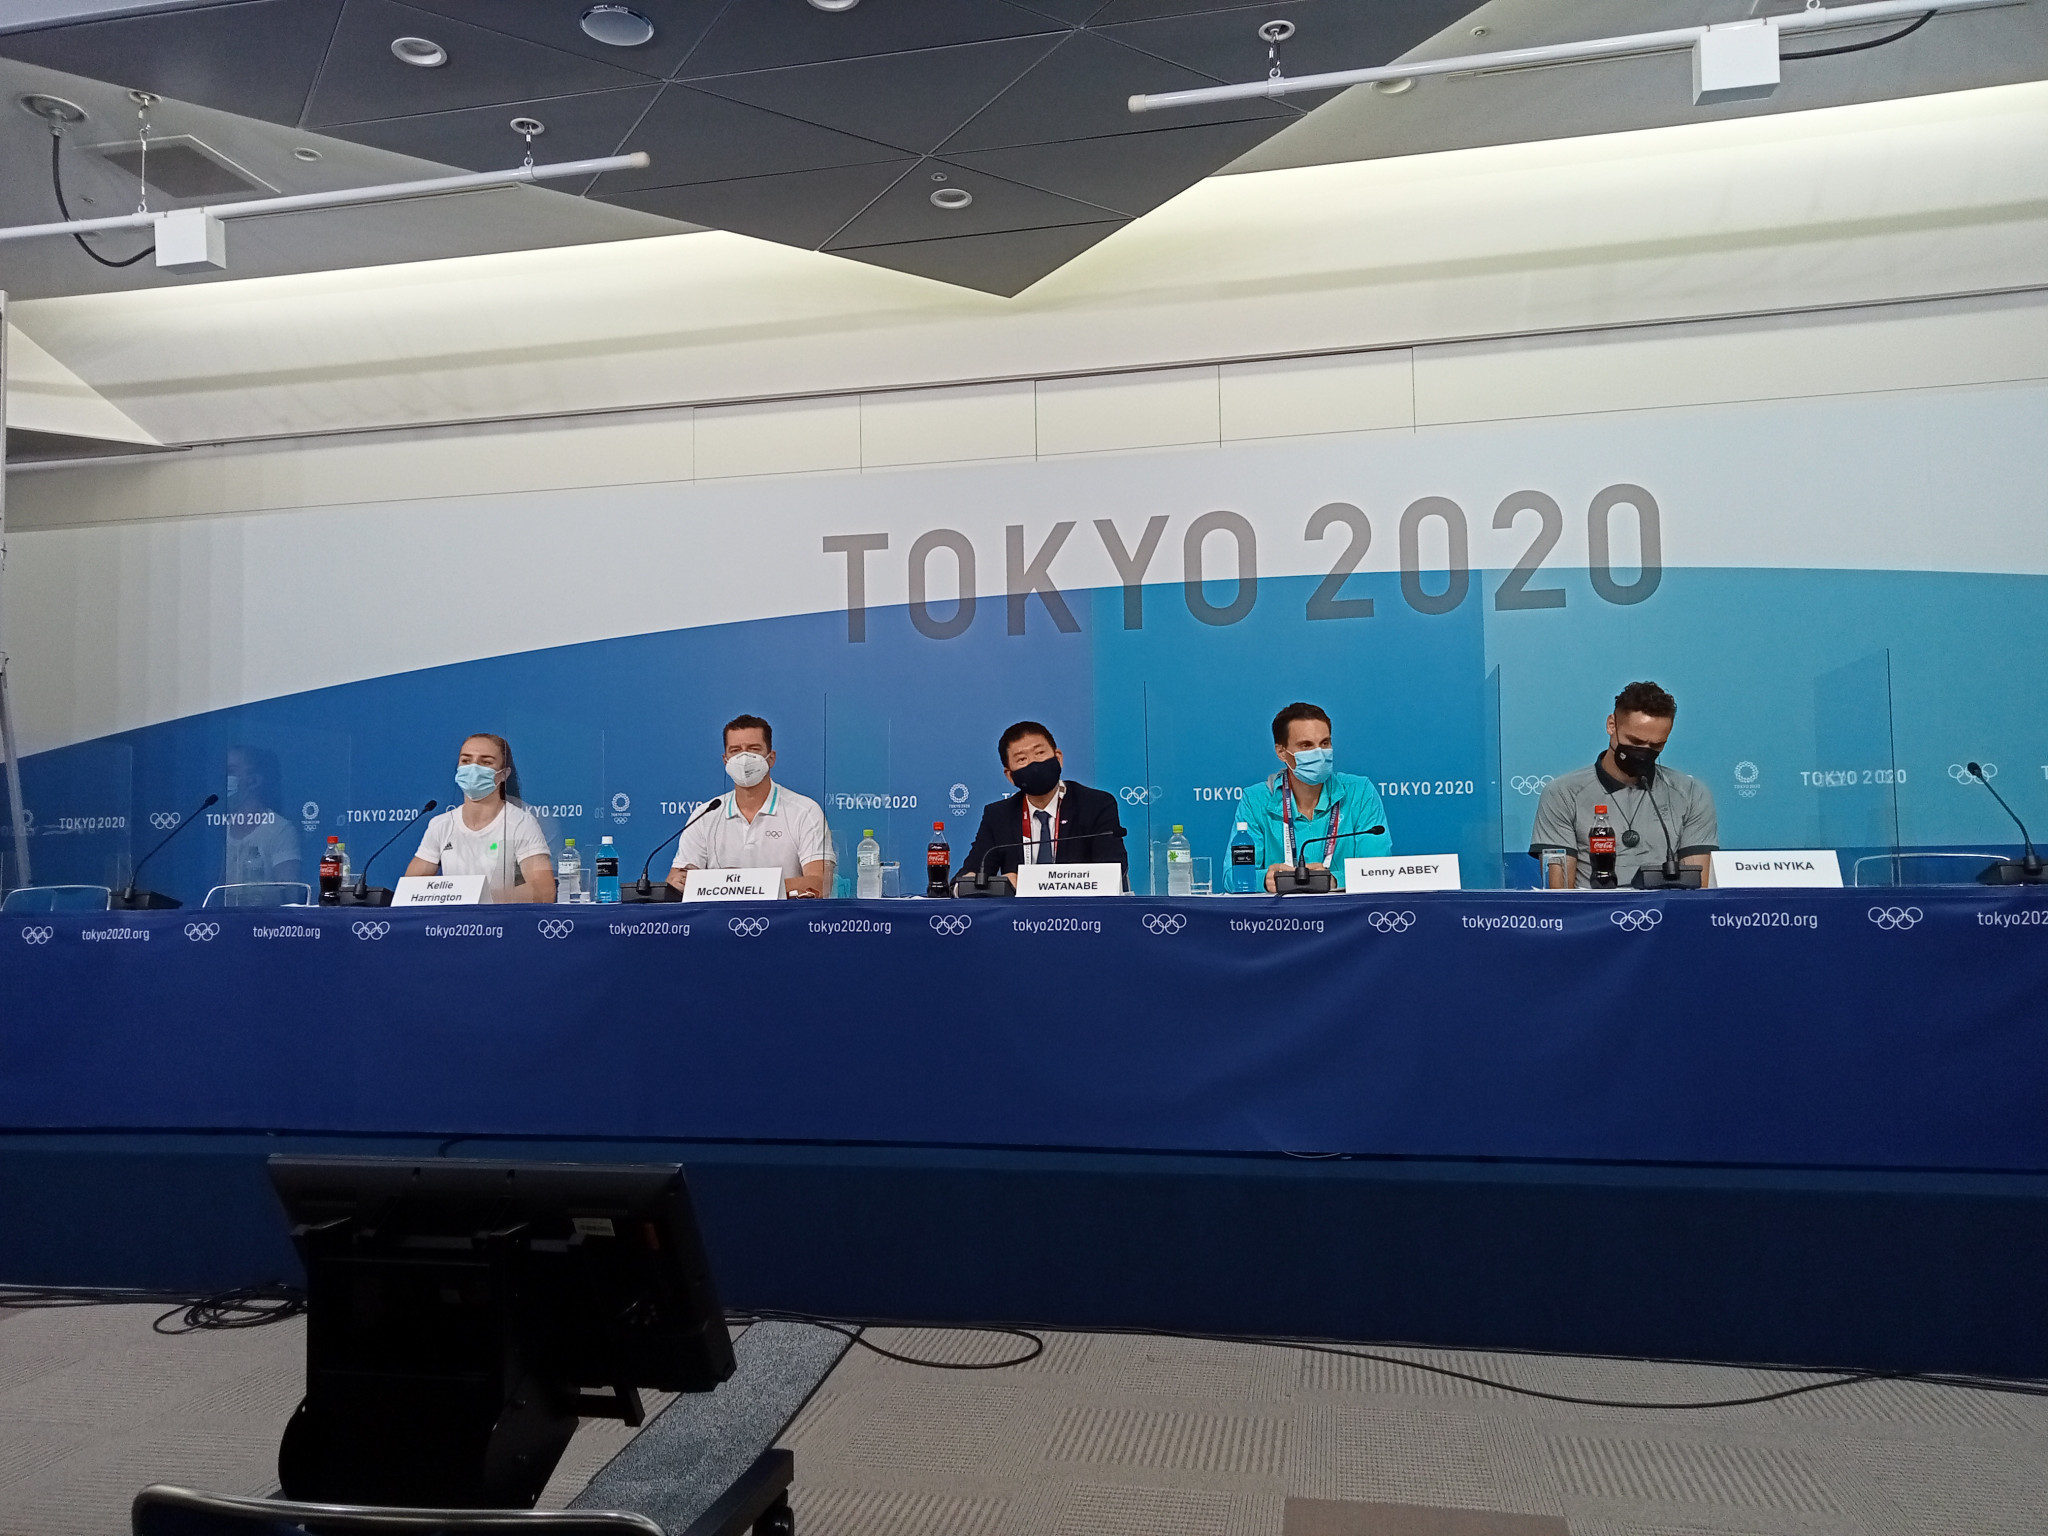 Morinari Watanabe, chairman of the Boxing Task Force, announced at a press conference on the eve of competition at the Tokyo 2020 Olympics that boxing had reached a 